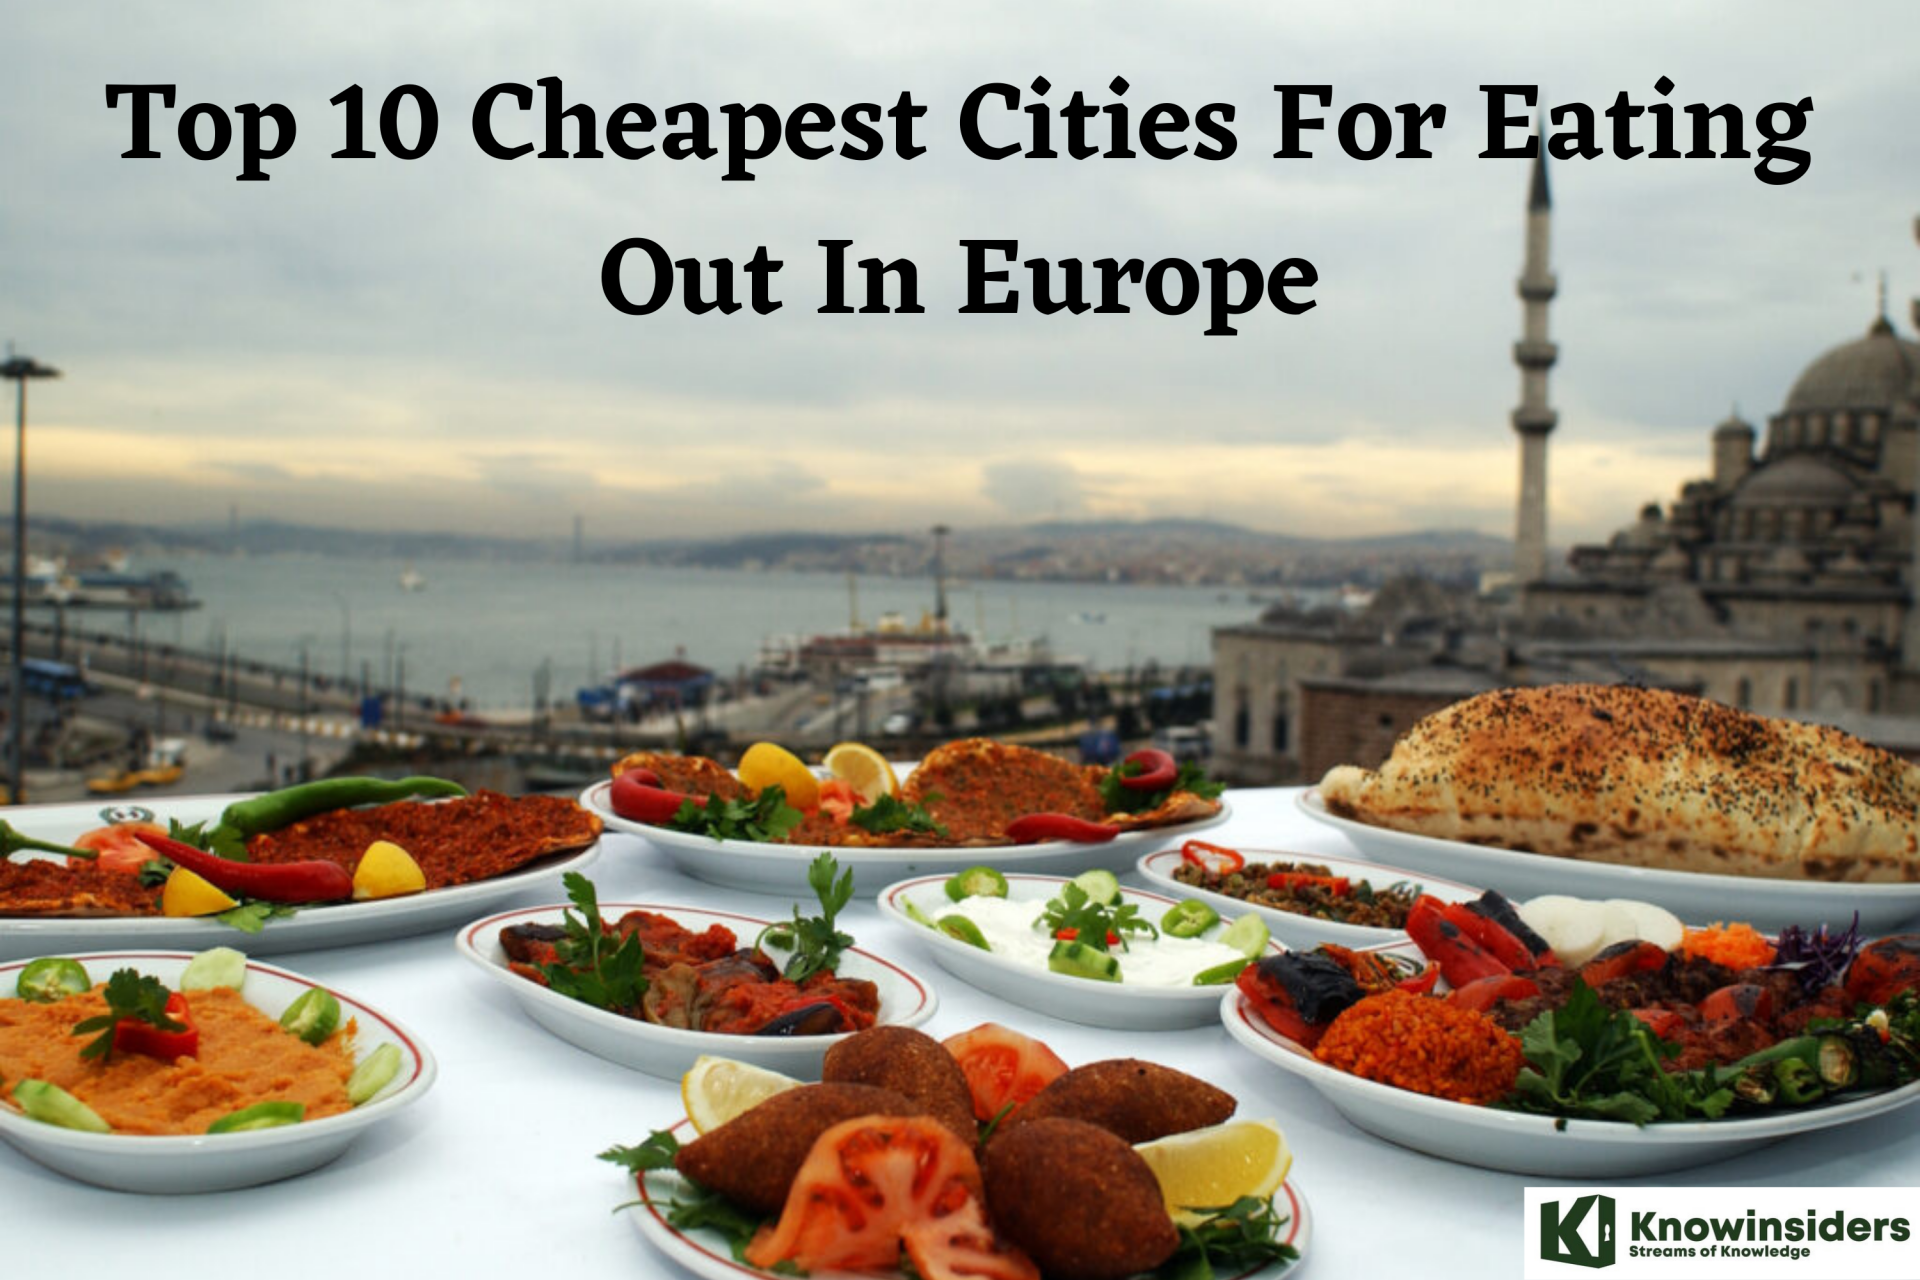 Top 10 Cheapest Cities For Eating Out In Europe